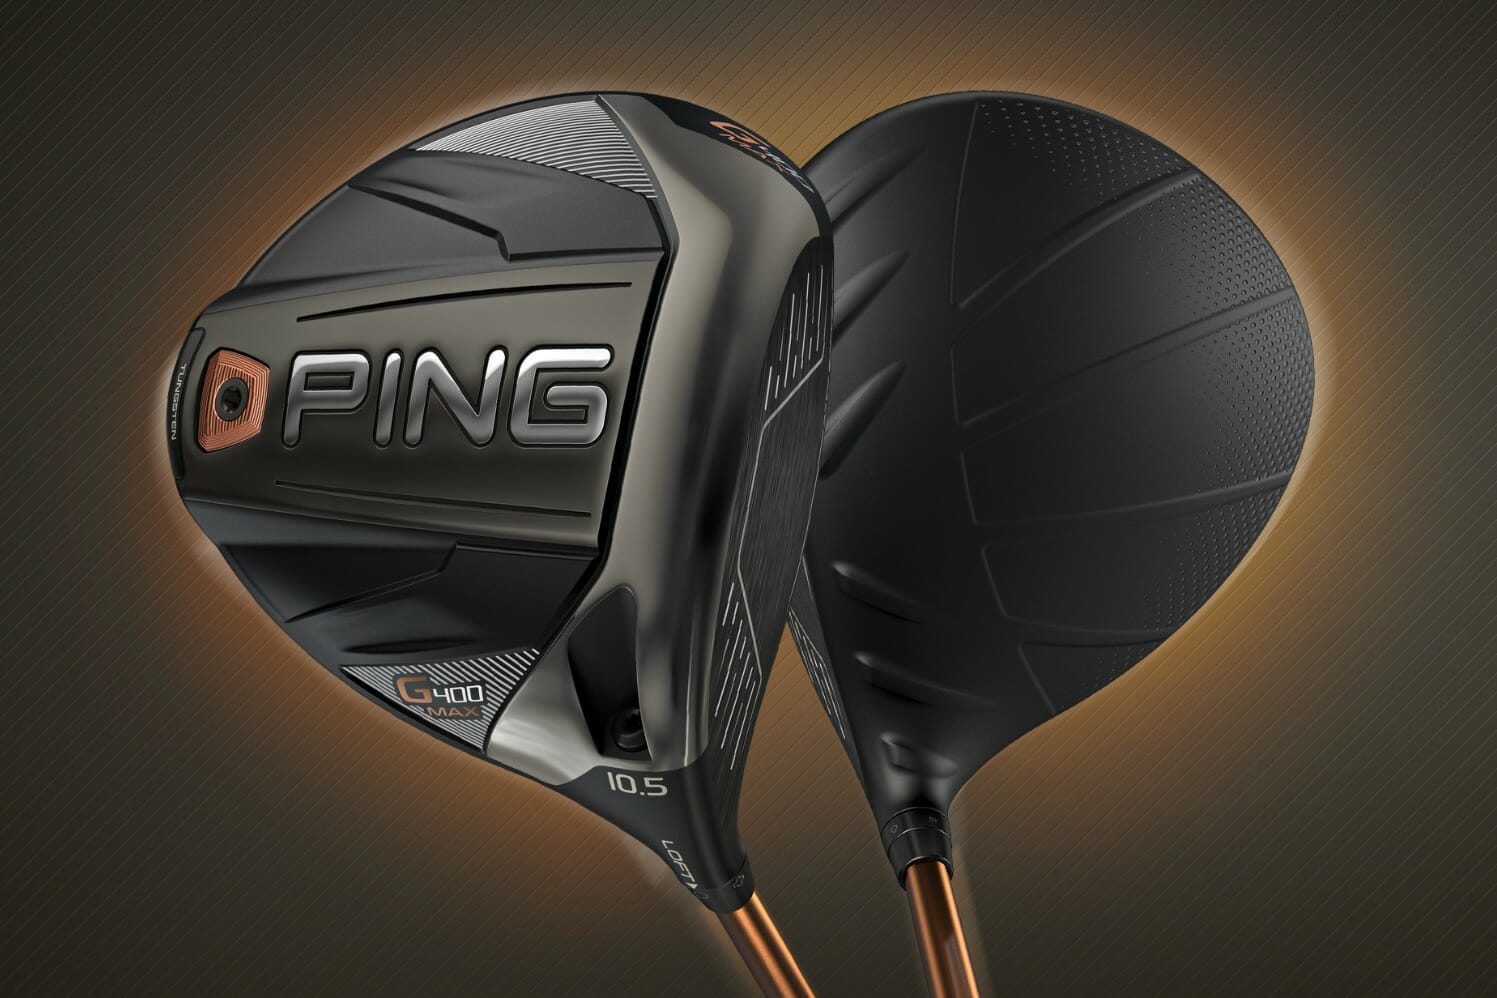 PING Take forgiveness to the limit with new G400 Max driver